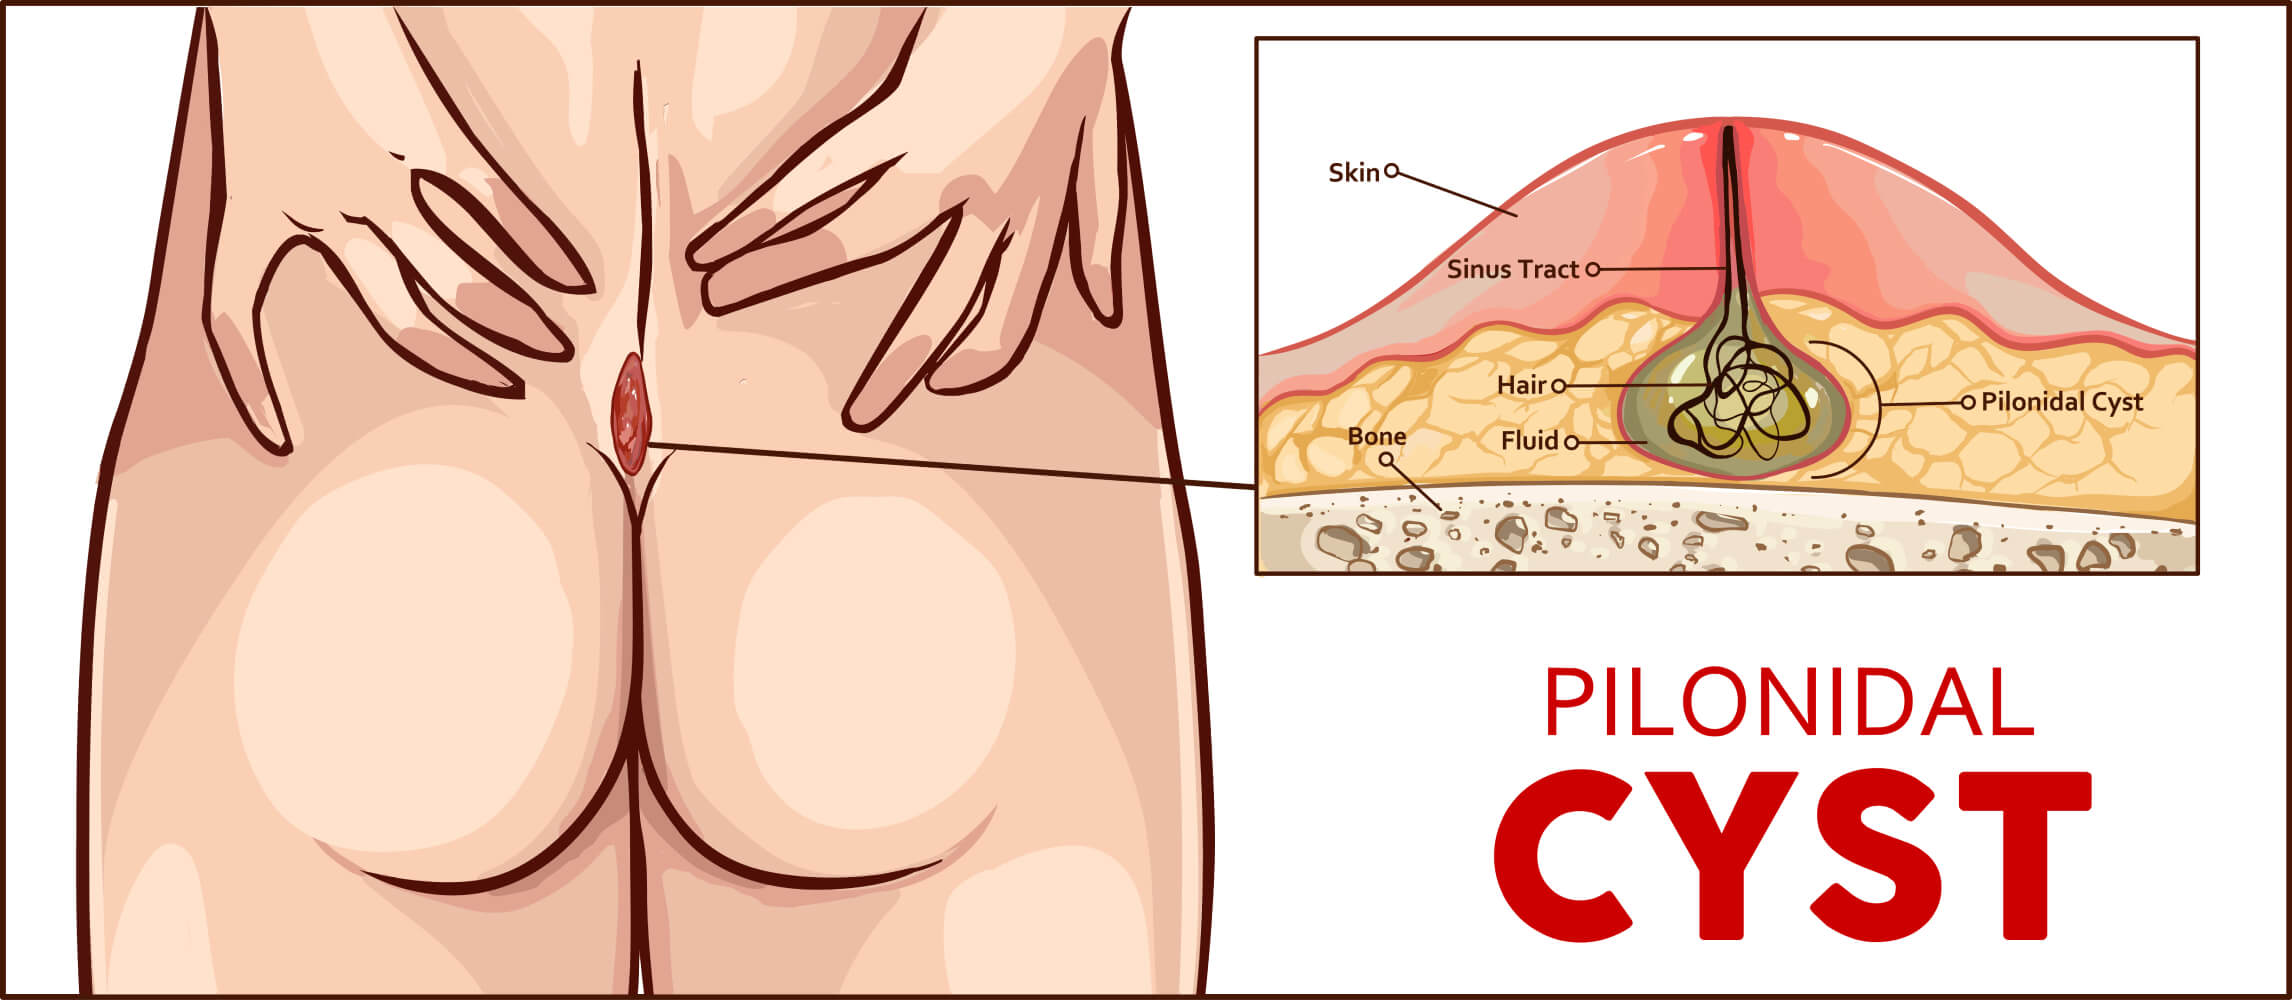 How Do You Treat Pilonidal Cysts